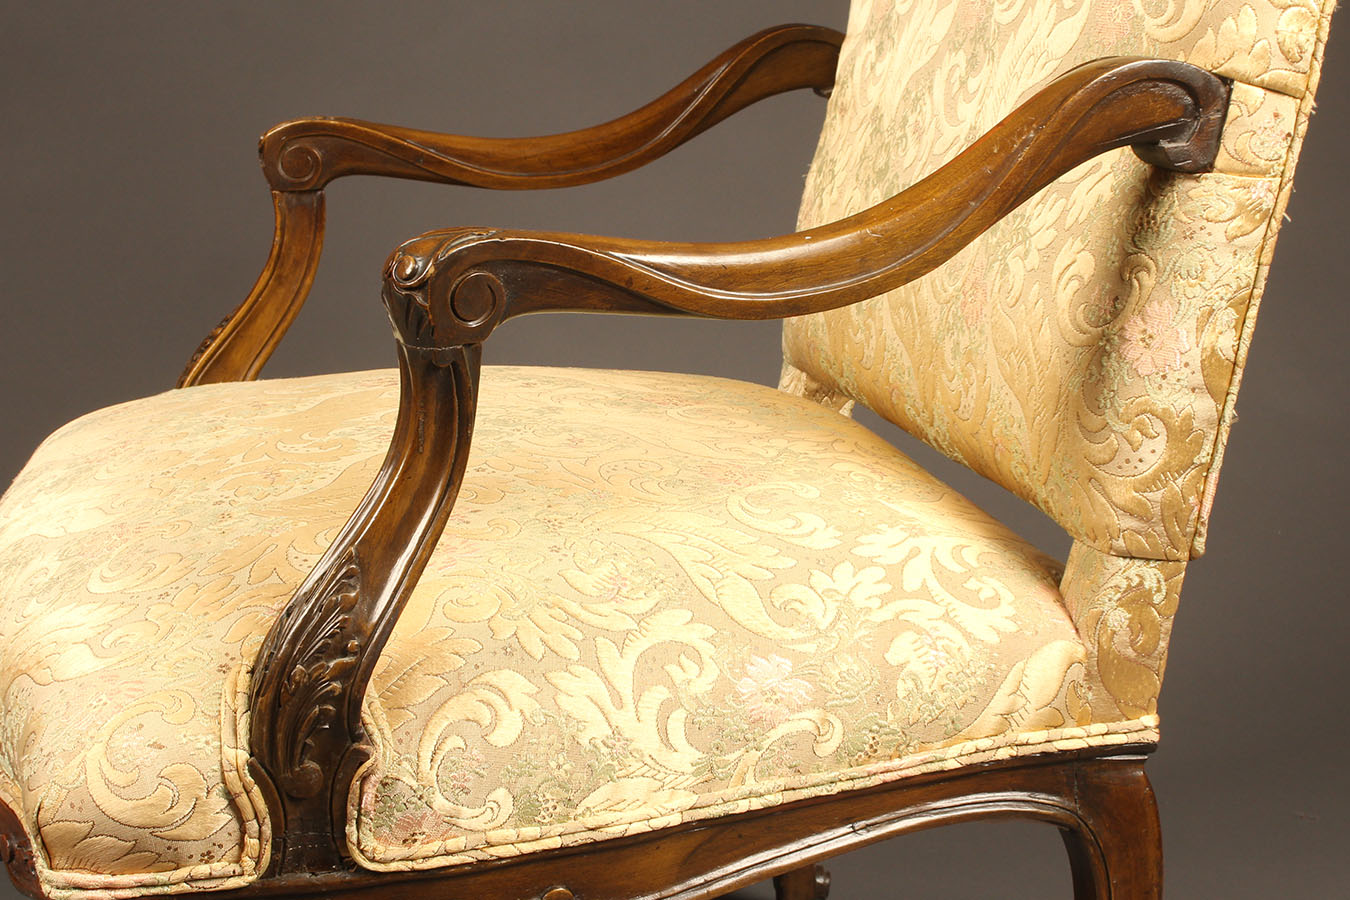 Louis XV Style Armchairs in Walnut, 19th Century, Set of 2 for sale at  Pamono